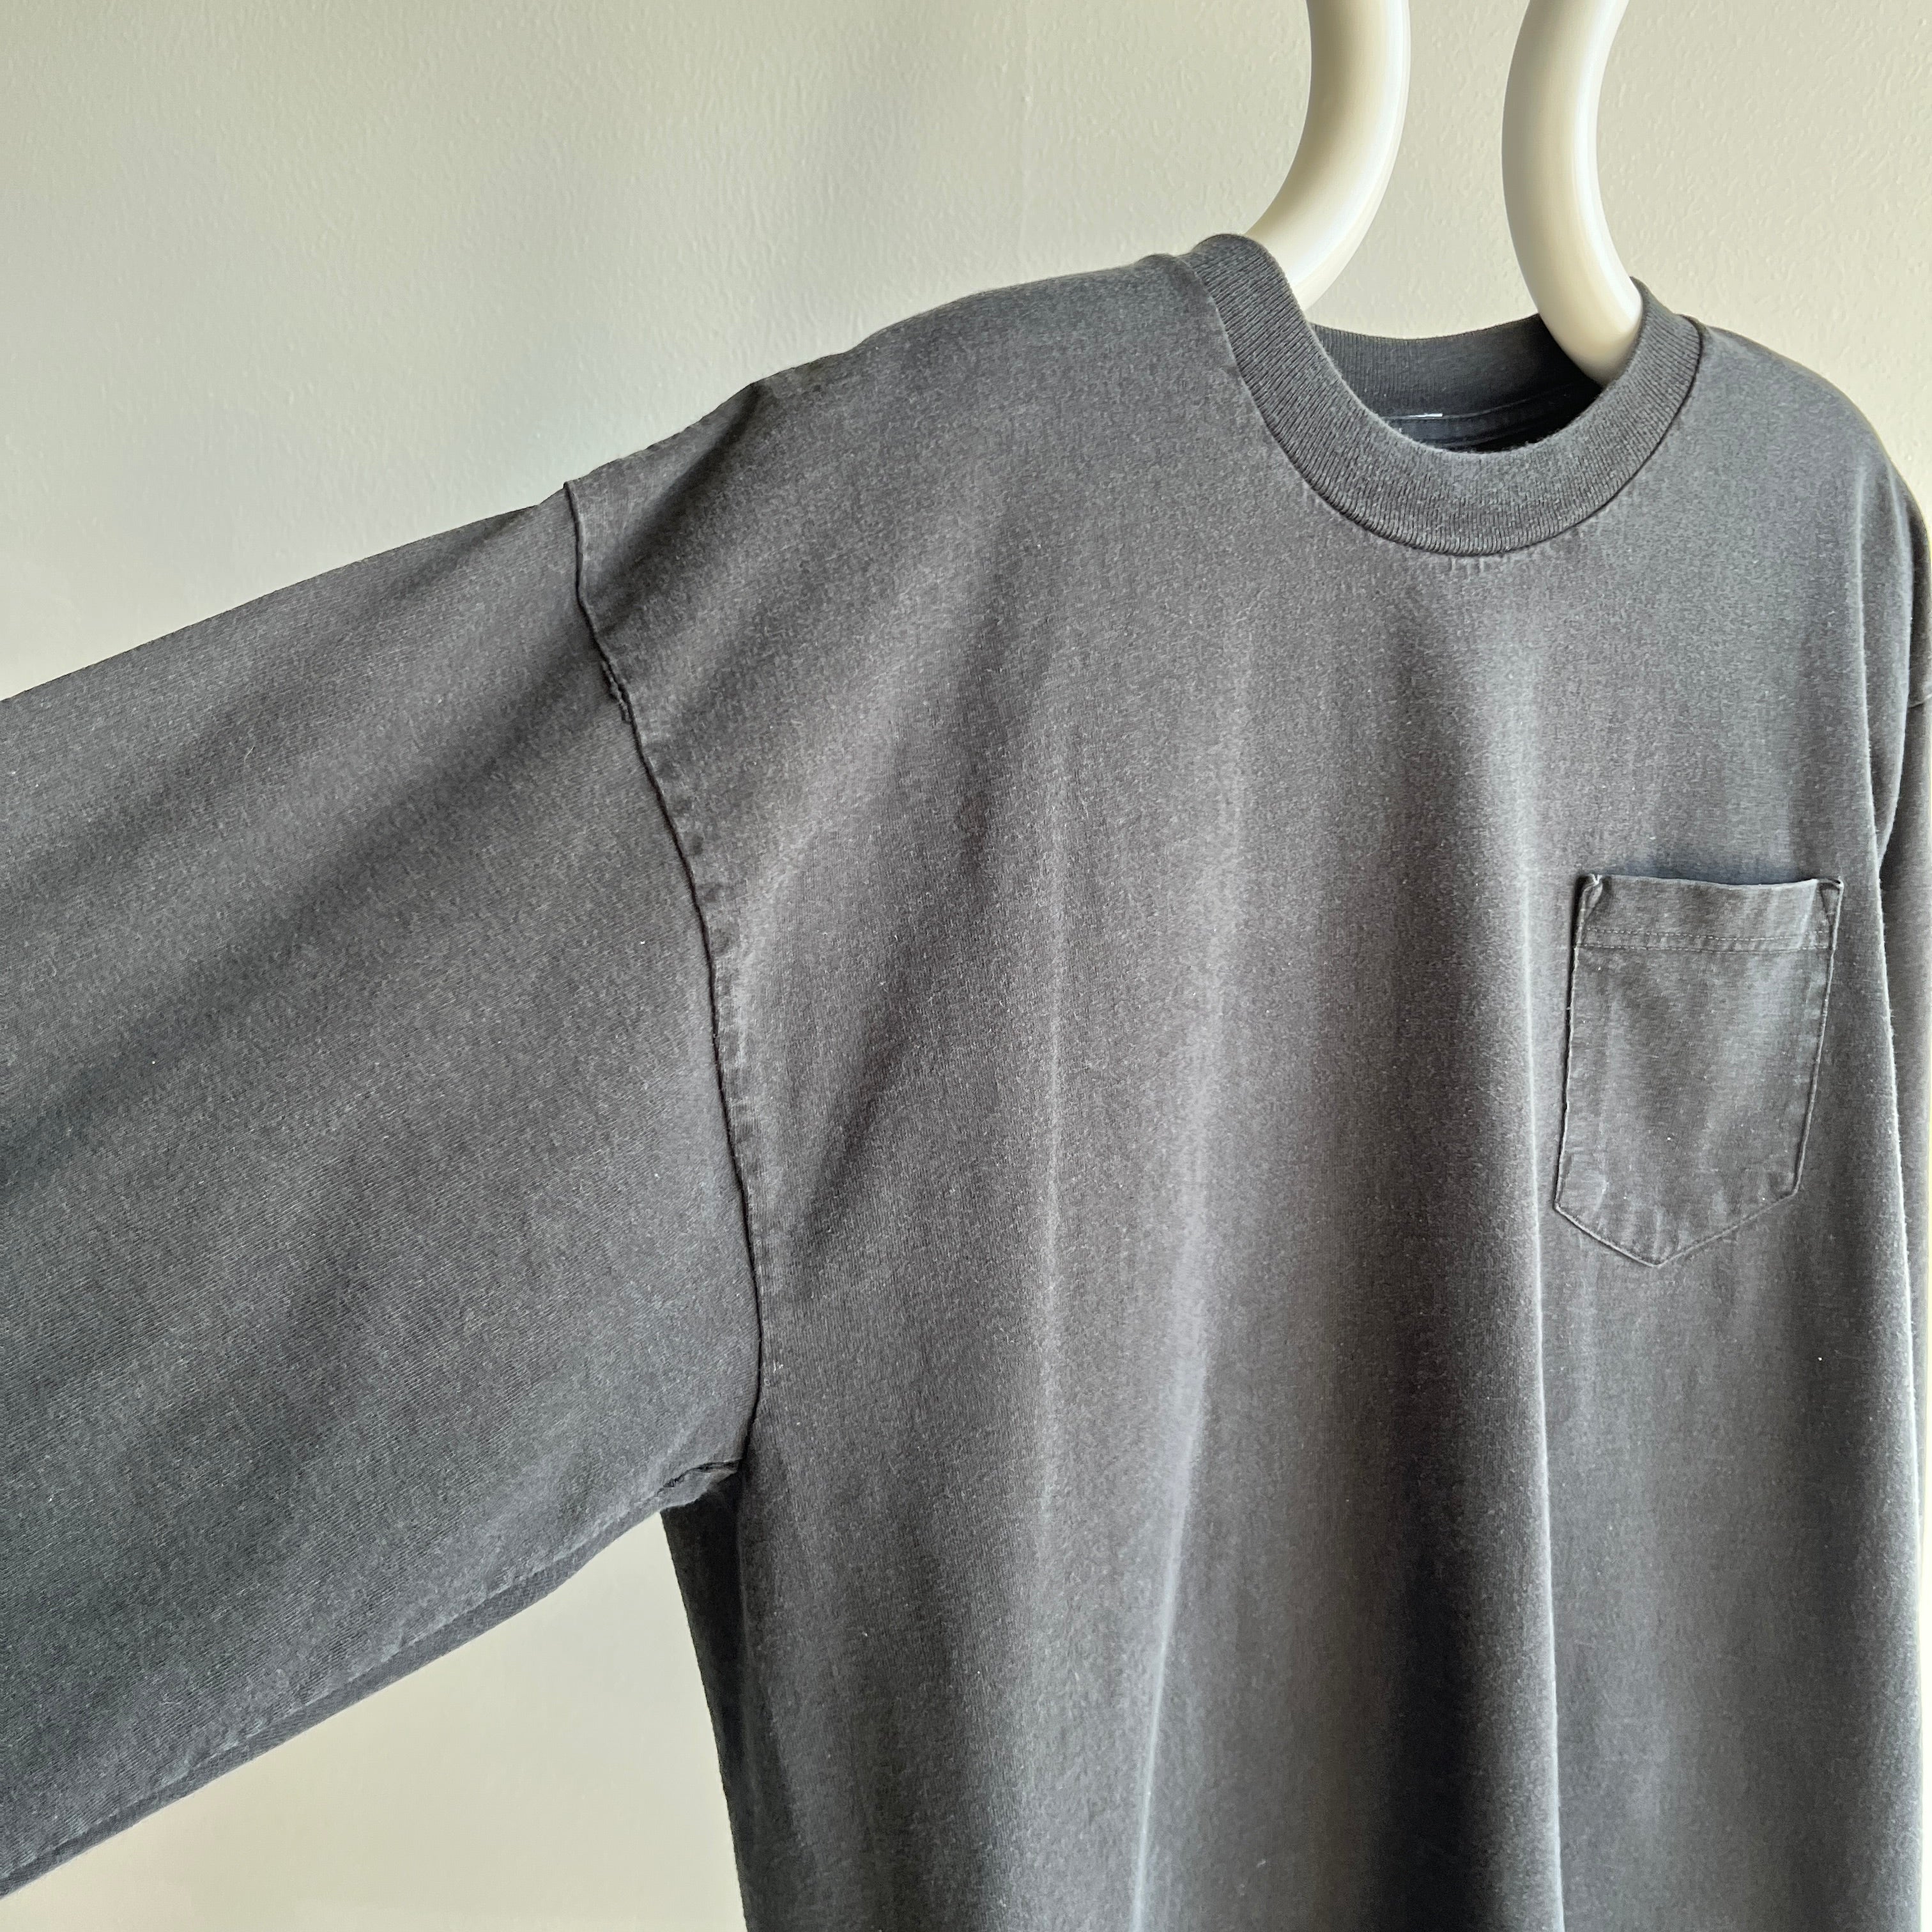 1990s Blank Perfectly Faded Long Sleeve Black Pocket T-Shirt by BVD